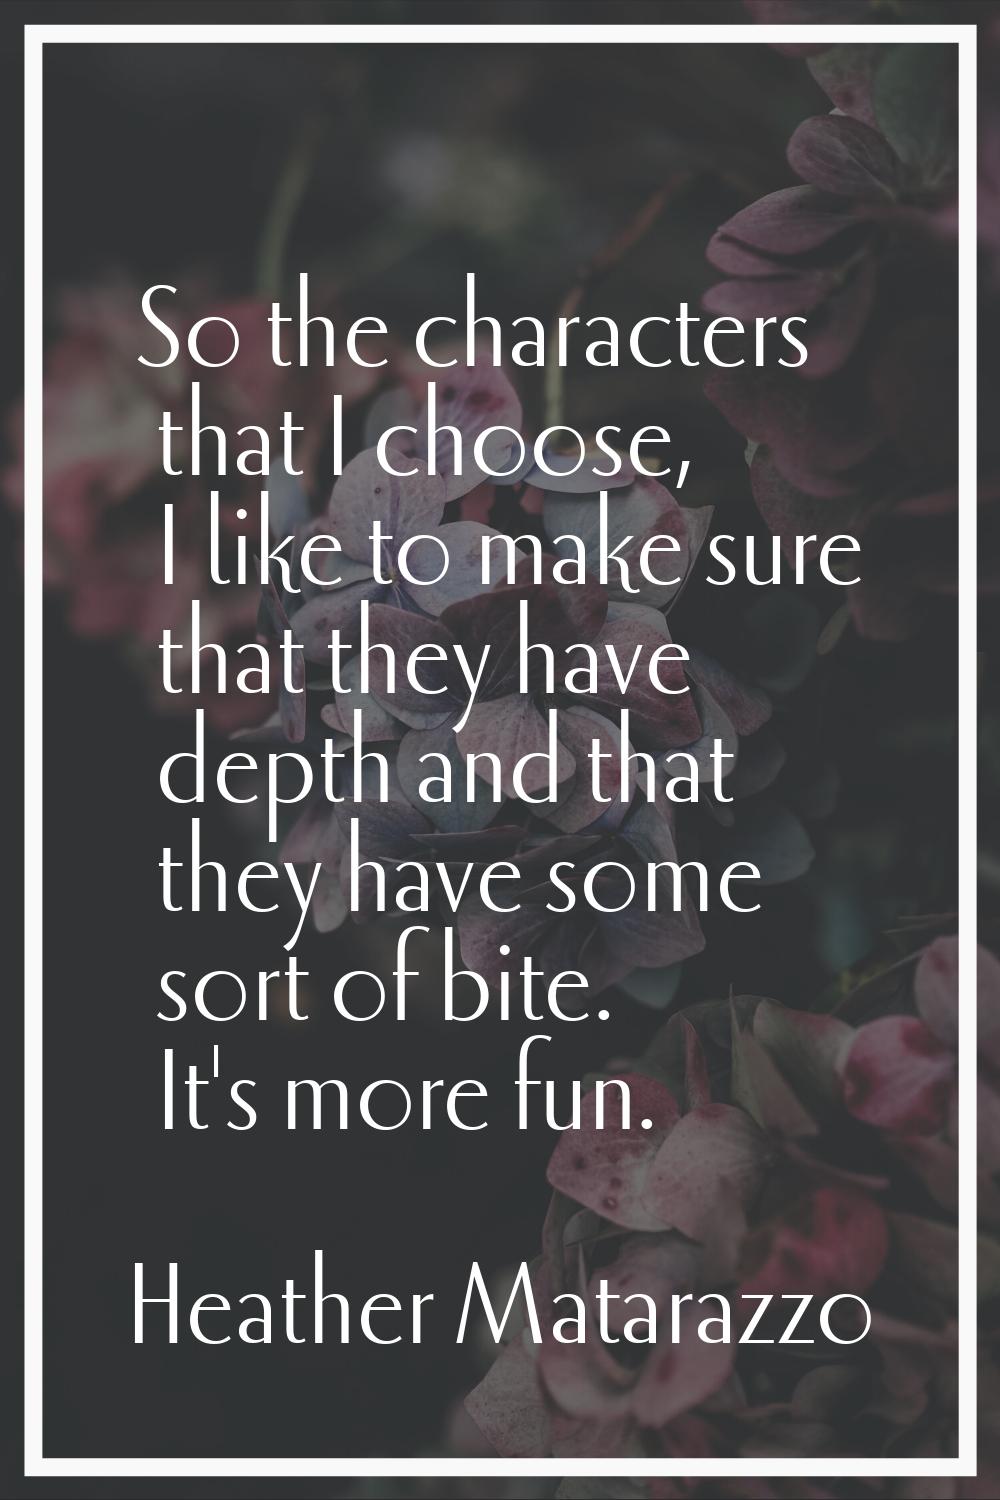 So the characters that I choose, I like to make sure that they have depth and that they have some s